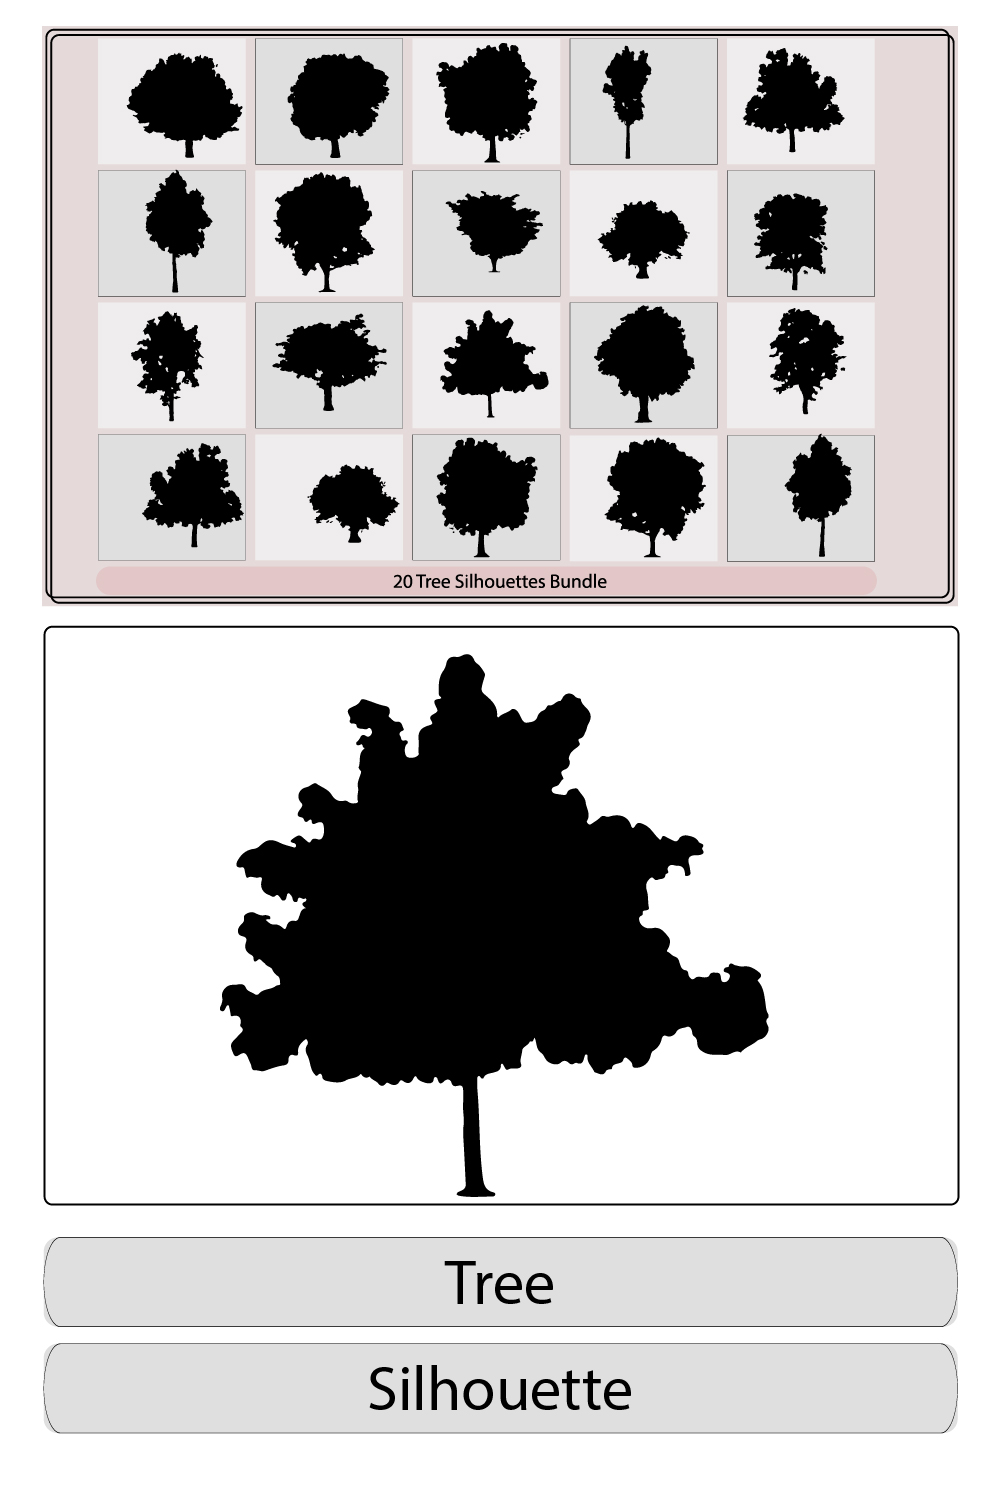 Tree silhouettes,Silhouette of pine trees,Vector trees, Beautiful vector tree silhouette outline vector icon, pinterest preview image.